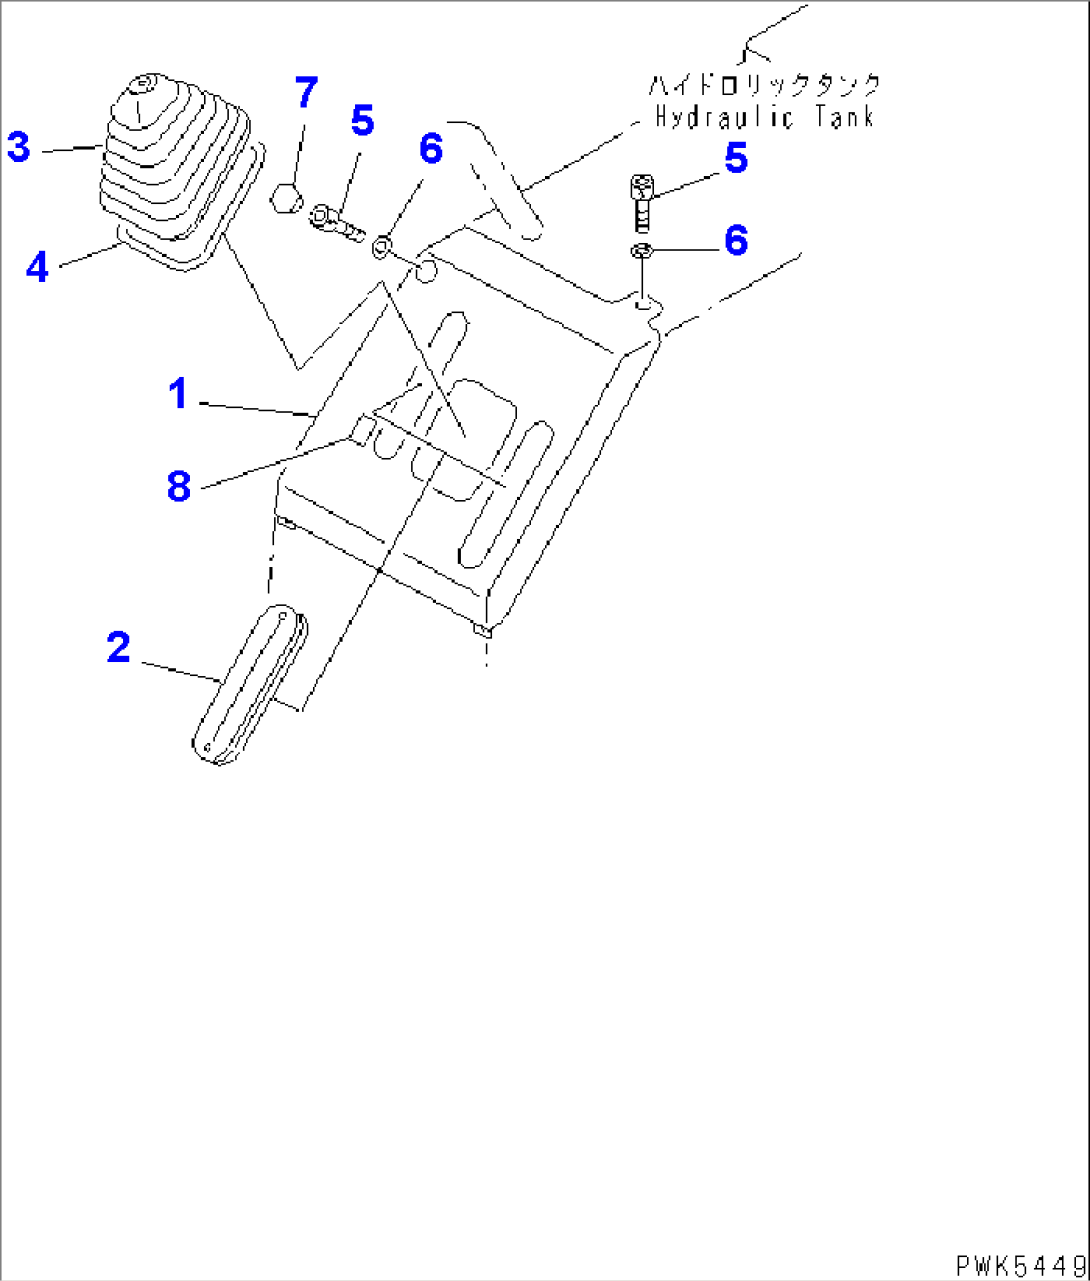 WORK EQUIPMENT CONTROL (GUIDE) (WITH 3-POINT HITCH)